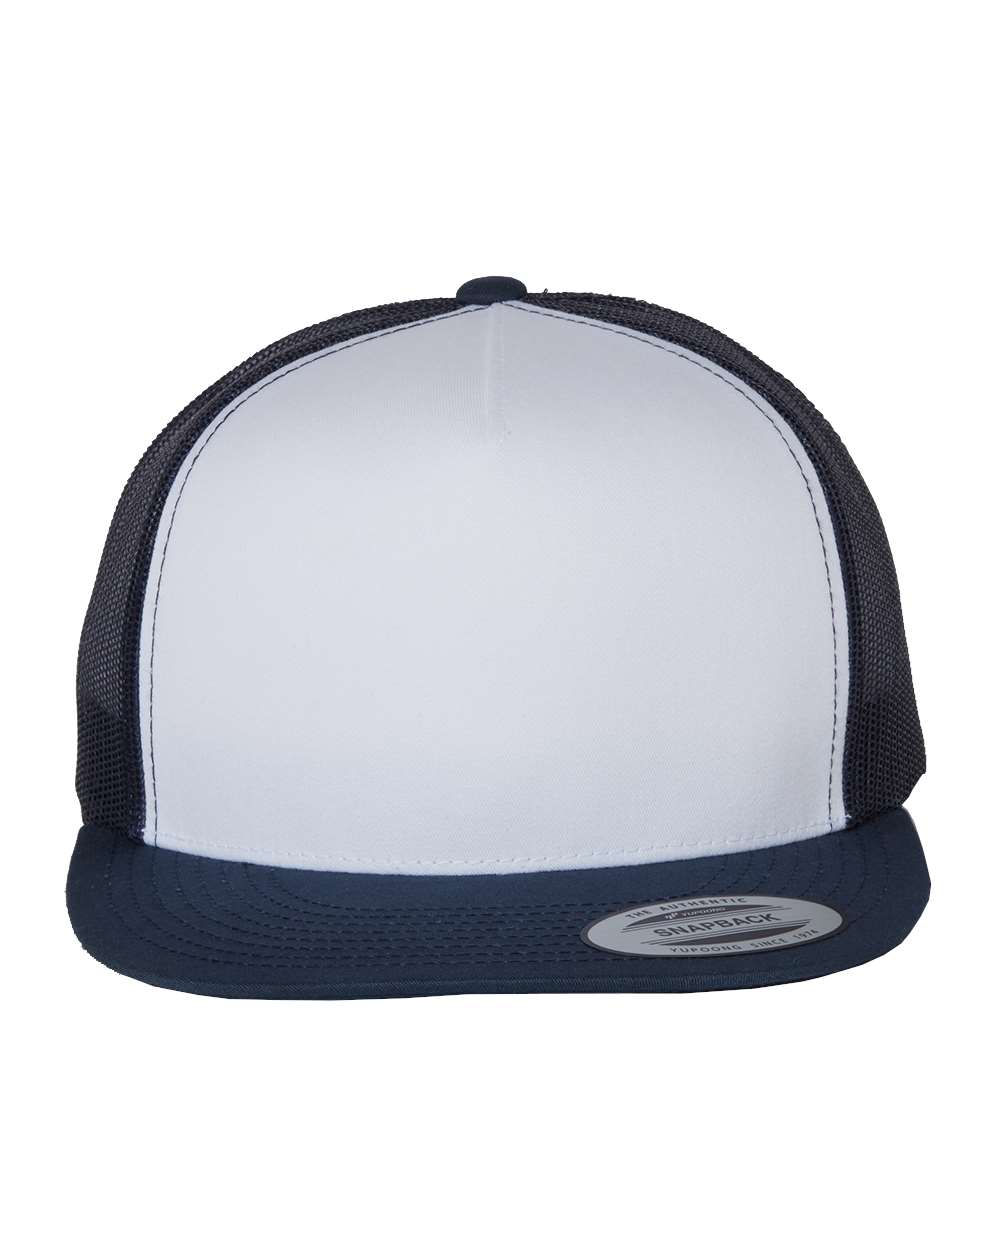 Yupoong 6006W Adult Classic Trucker with White Front Panel Cap - image 1 of 3